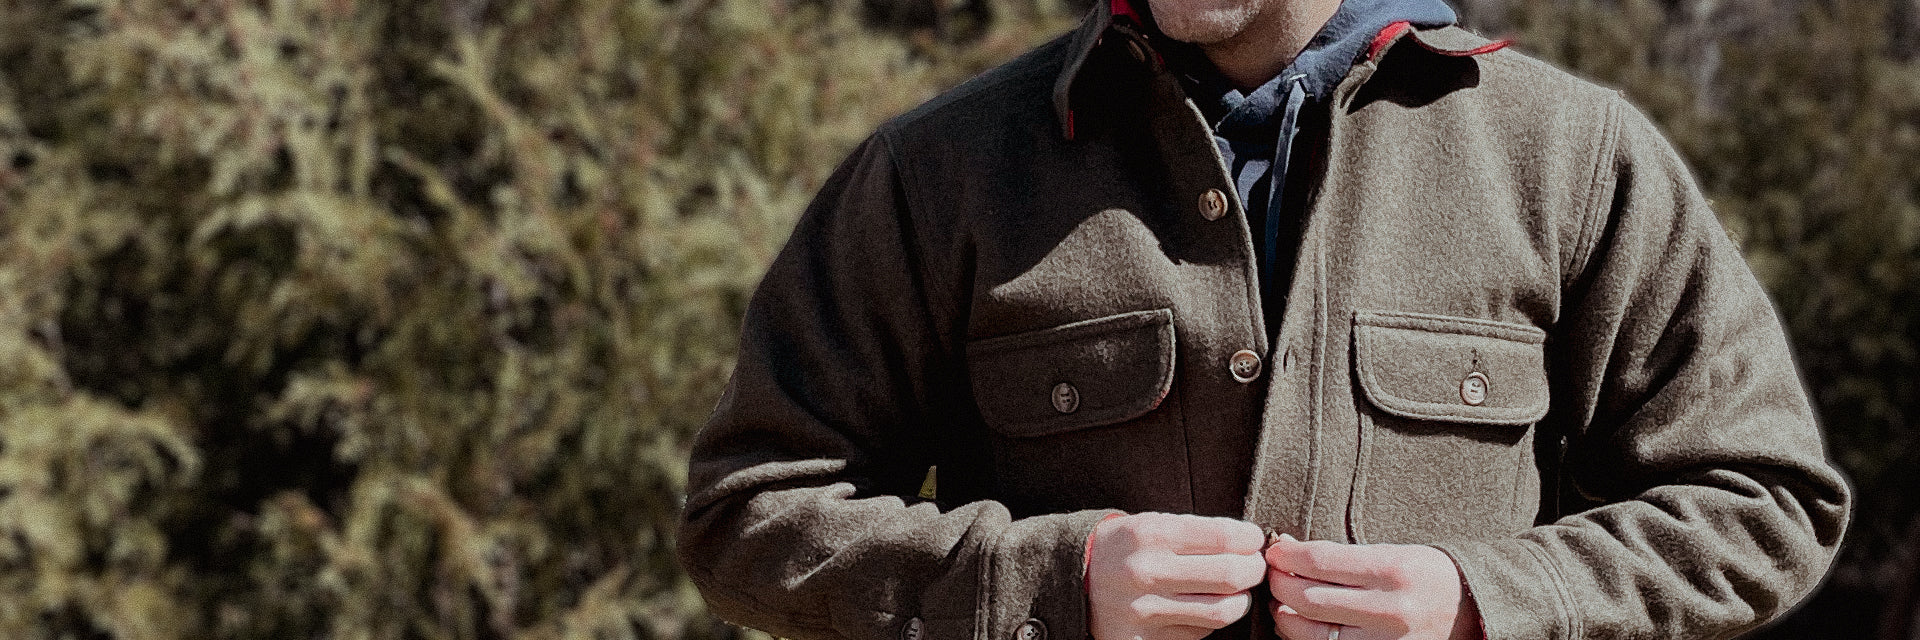 Wool Clothing Made In USA | Johnson Woolen Mills